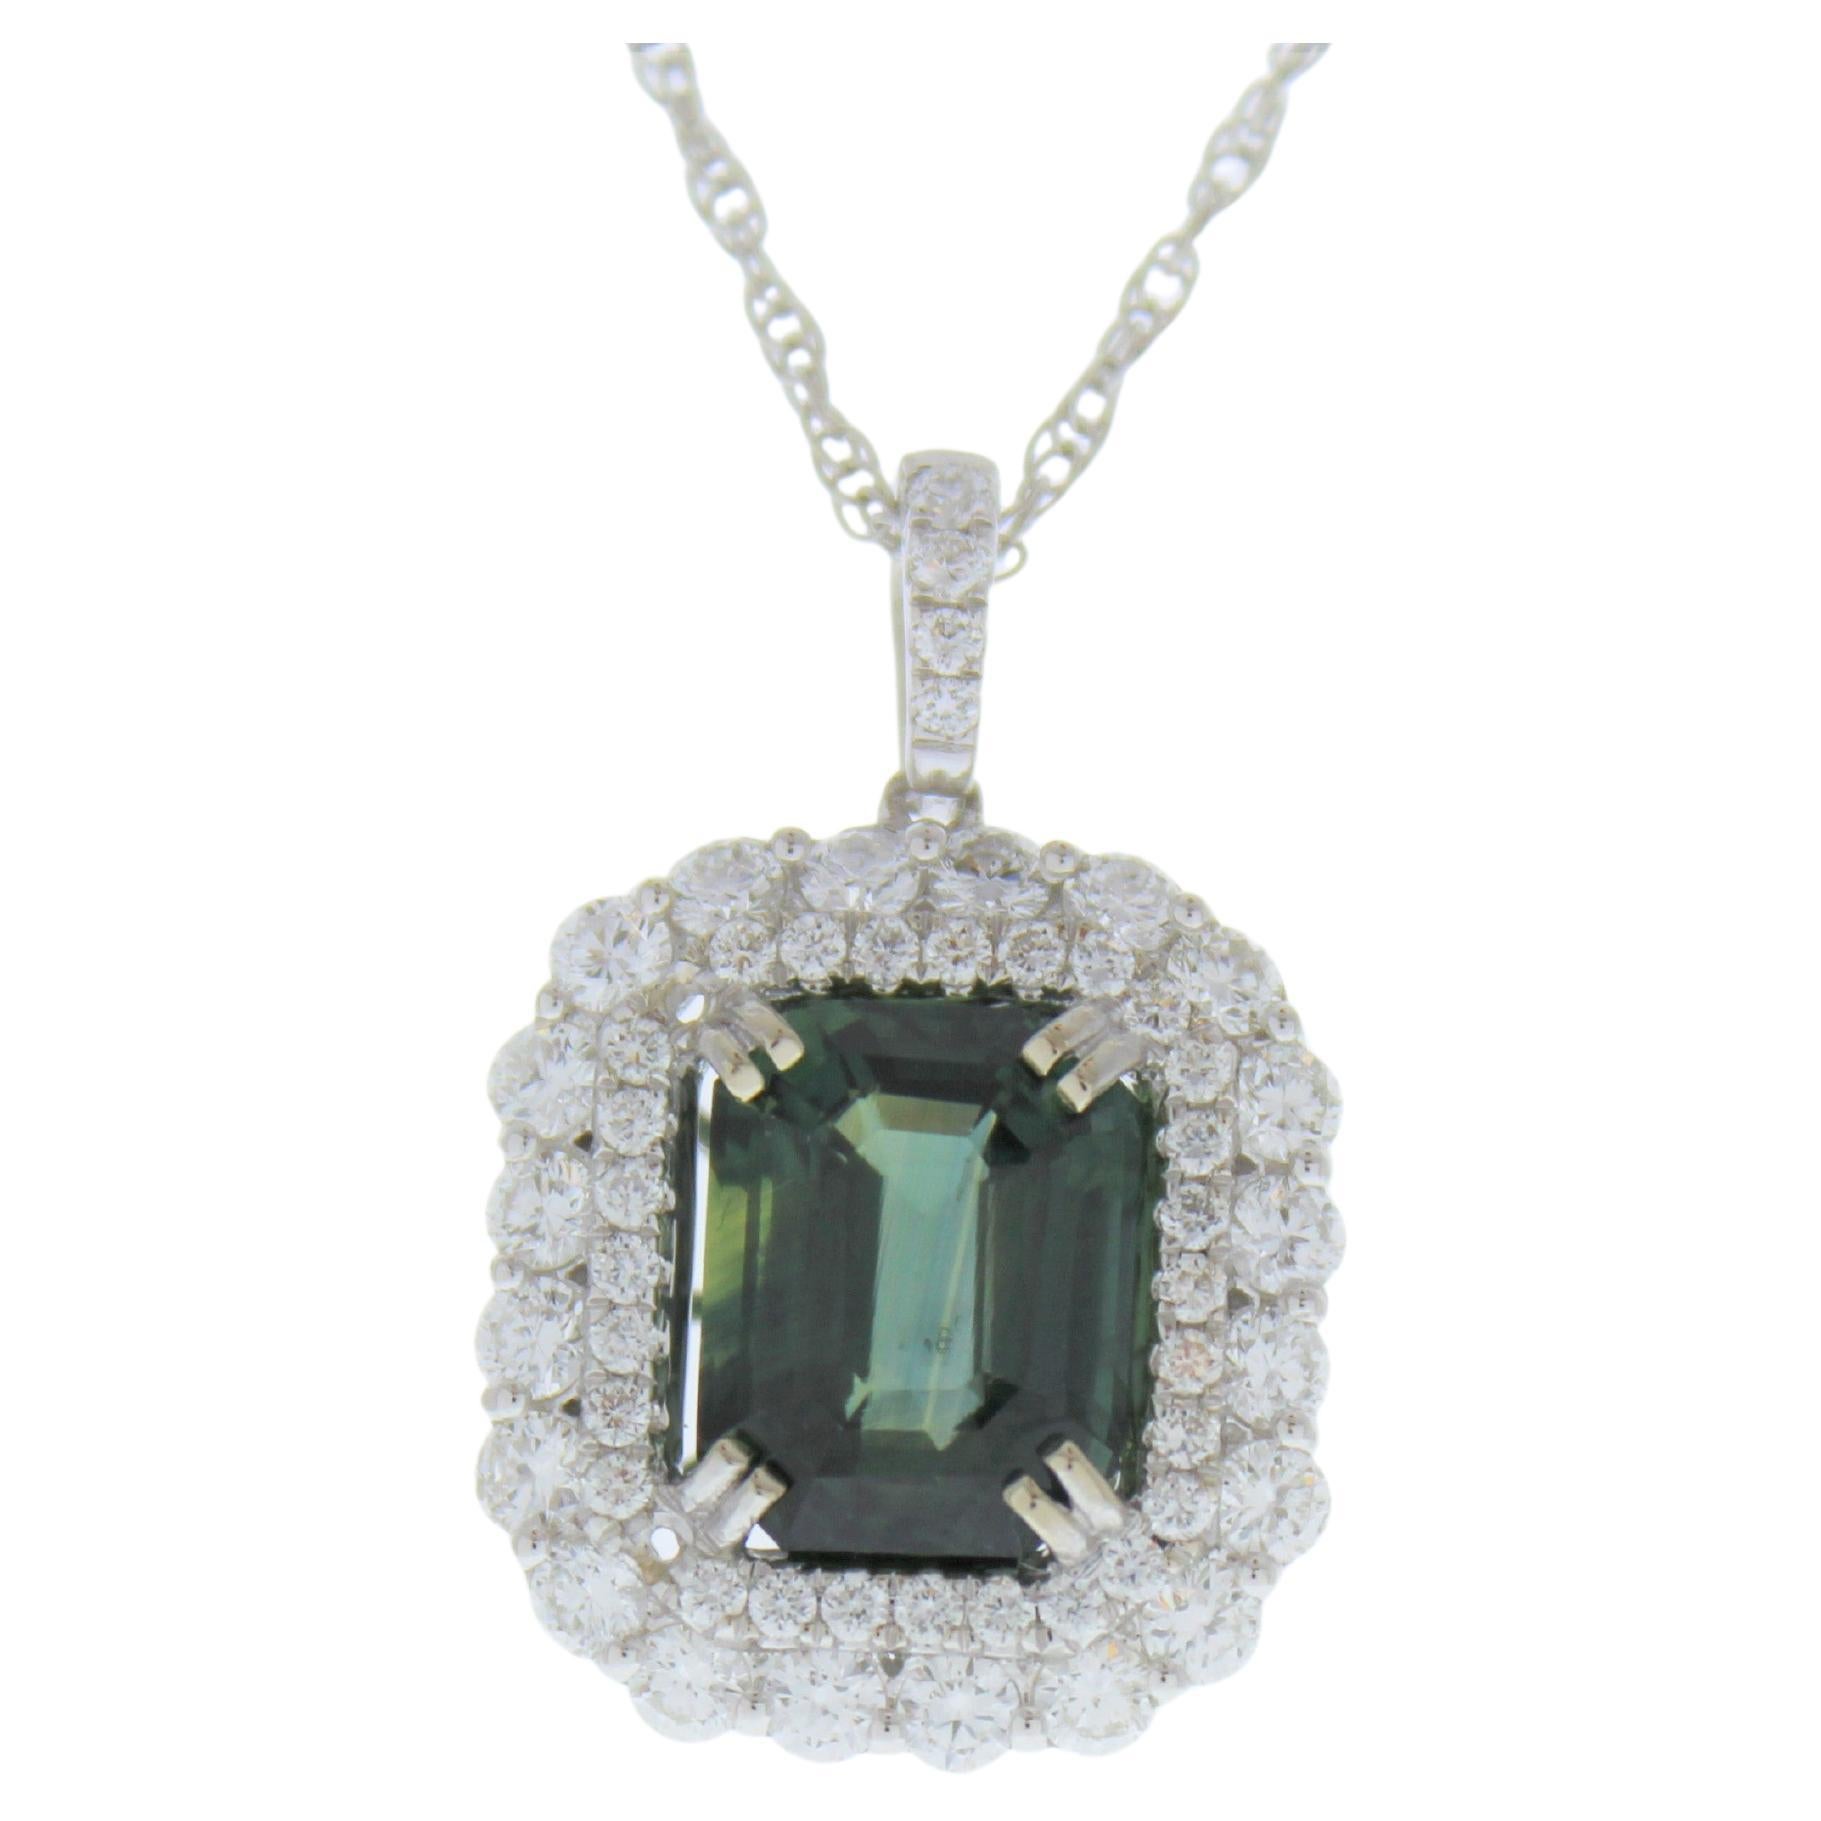 5.45CT Green Sapphire Octogonal Cut Pendant in 14K White Gold For Sale